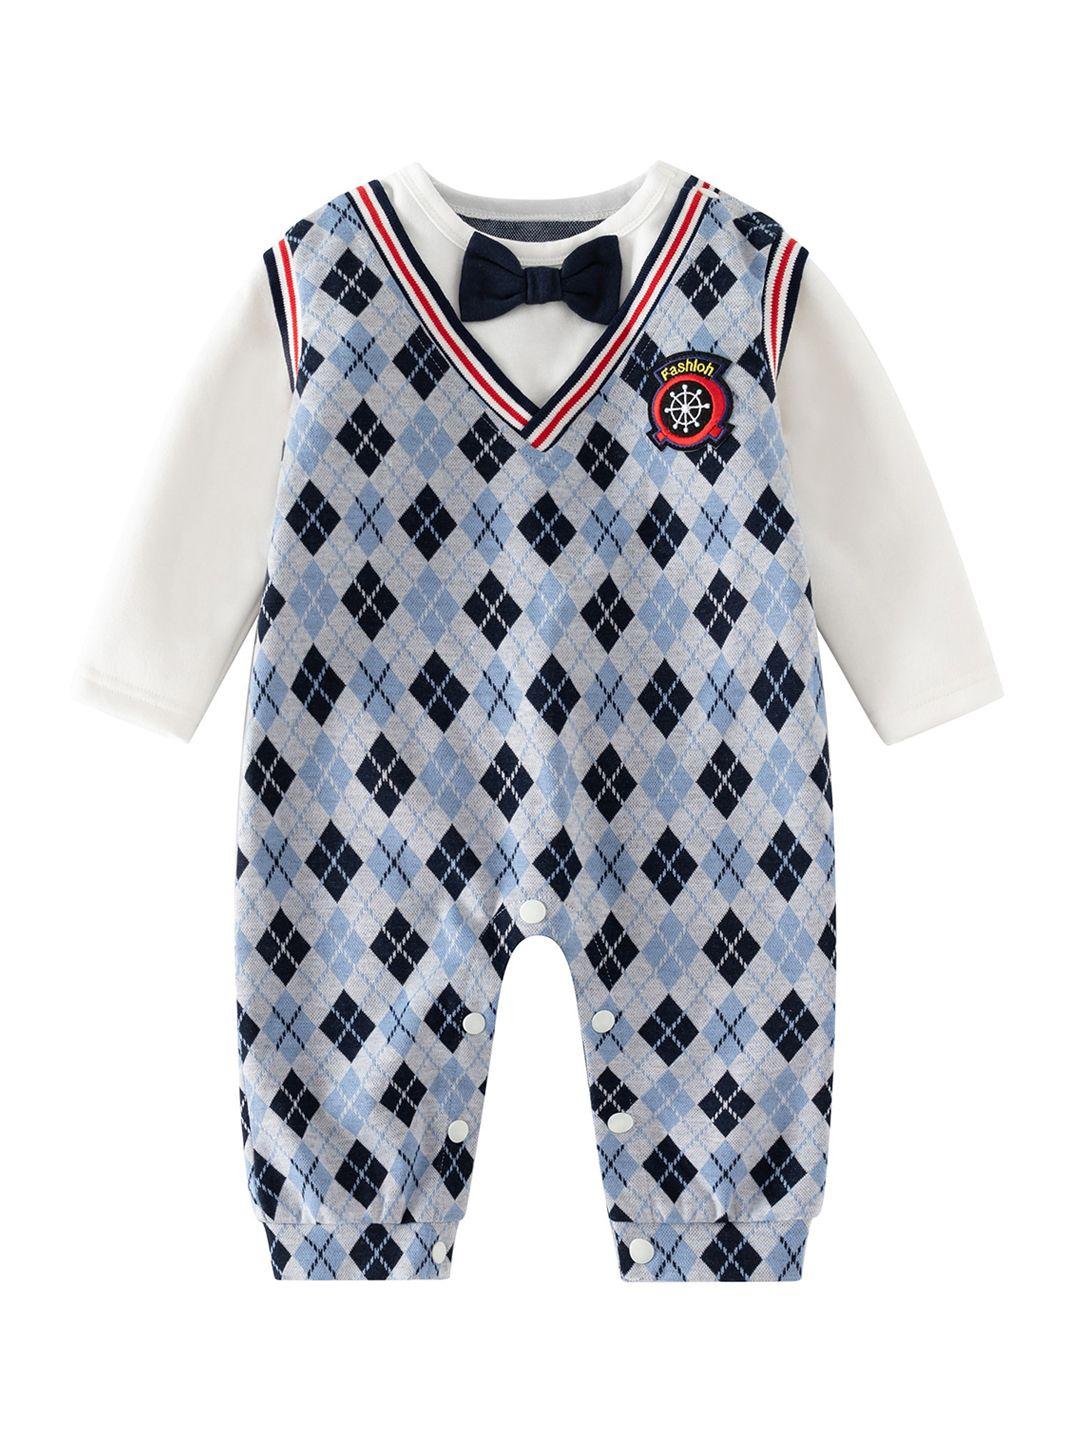 stylecast-infants-boys-checked-cotton-rompers